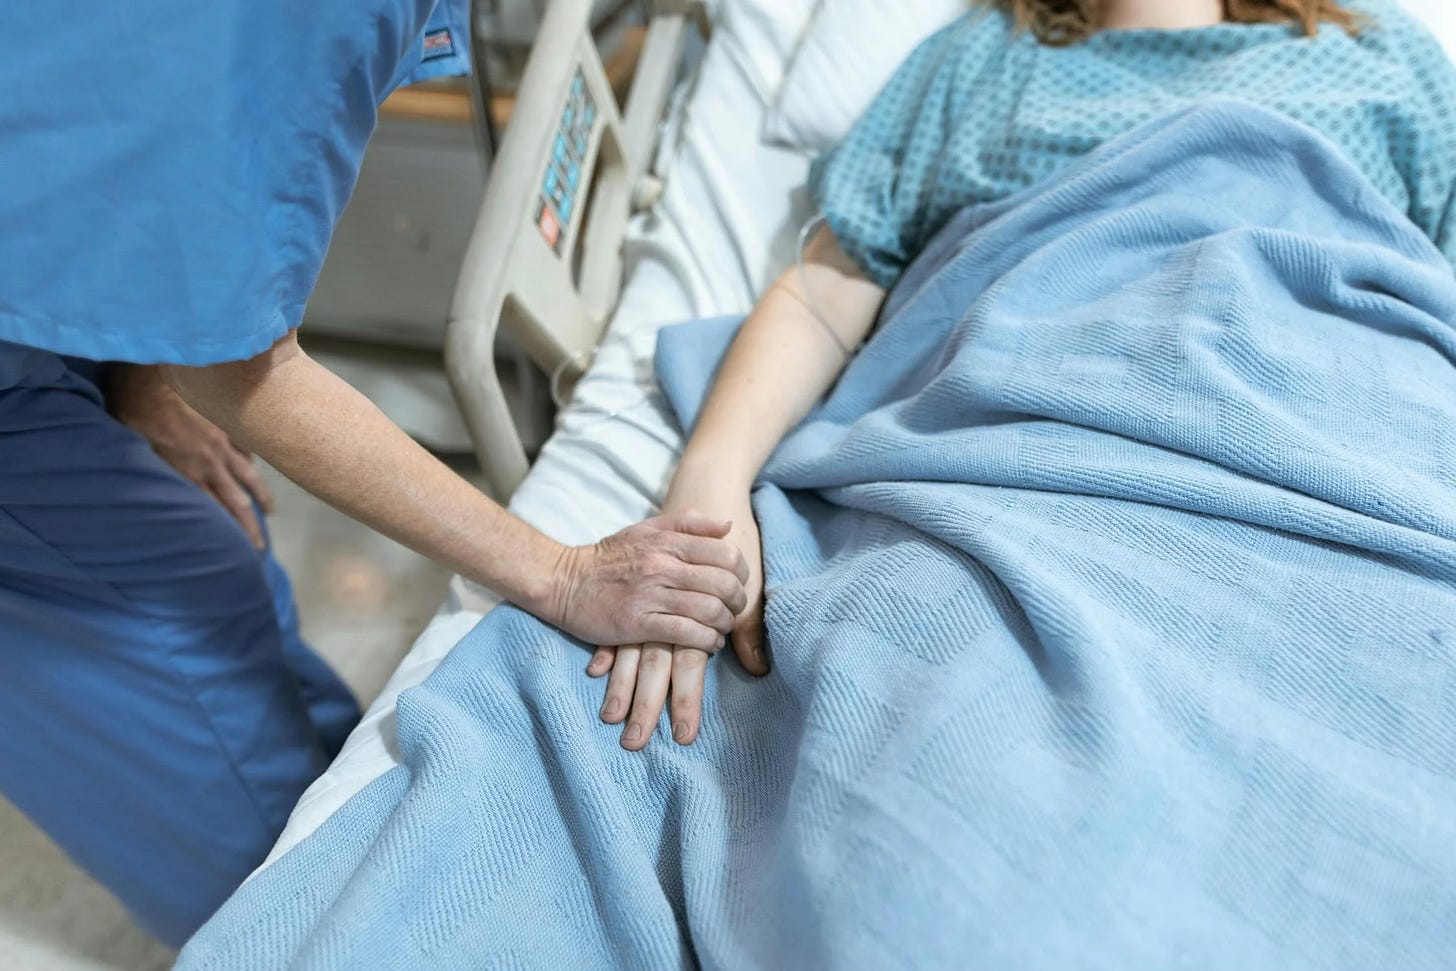 Nurse holds a patients hand in a hospital bed.